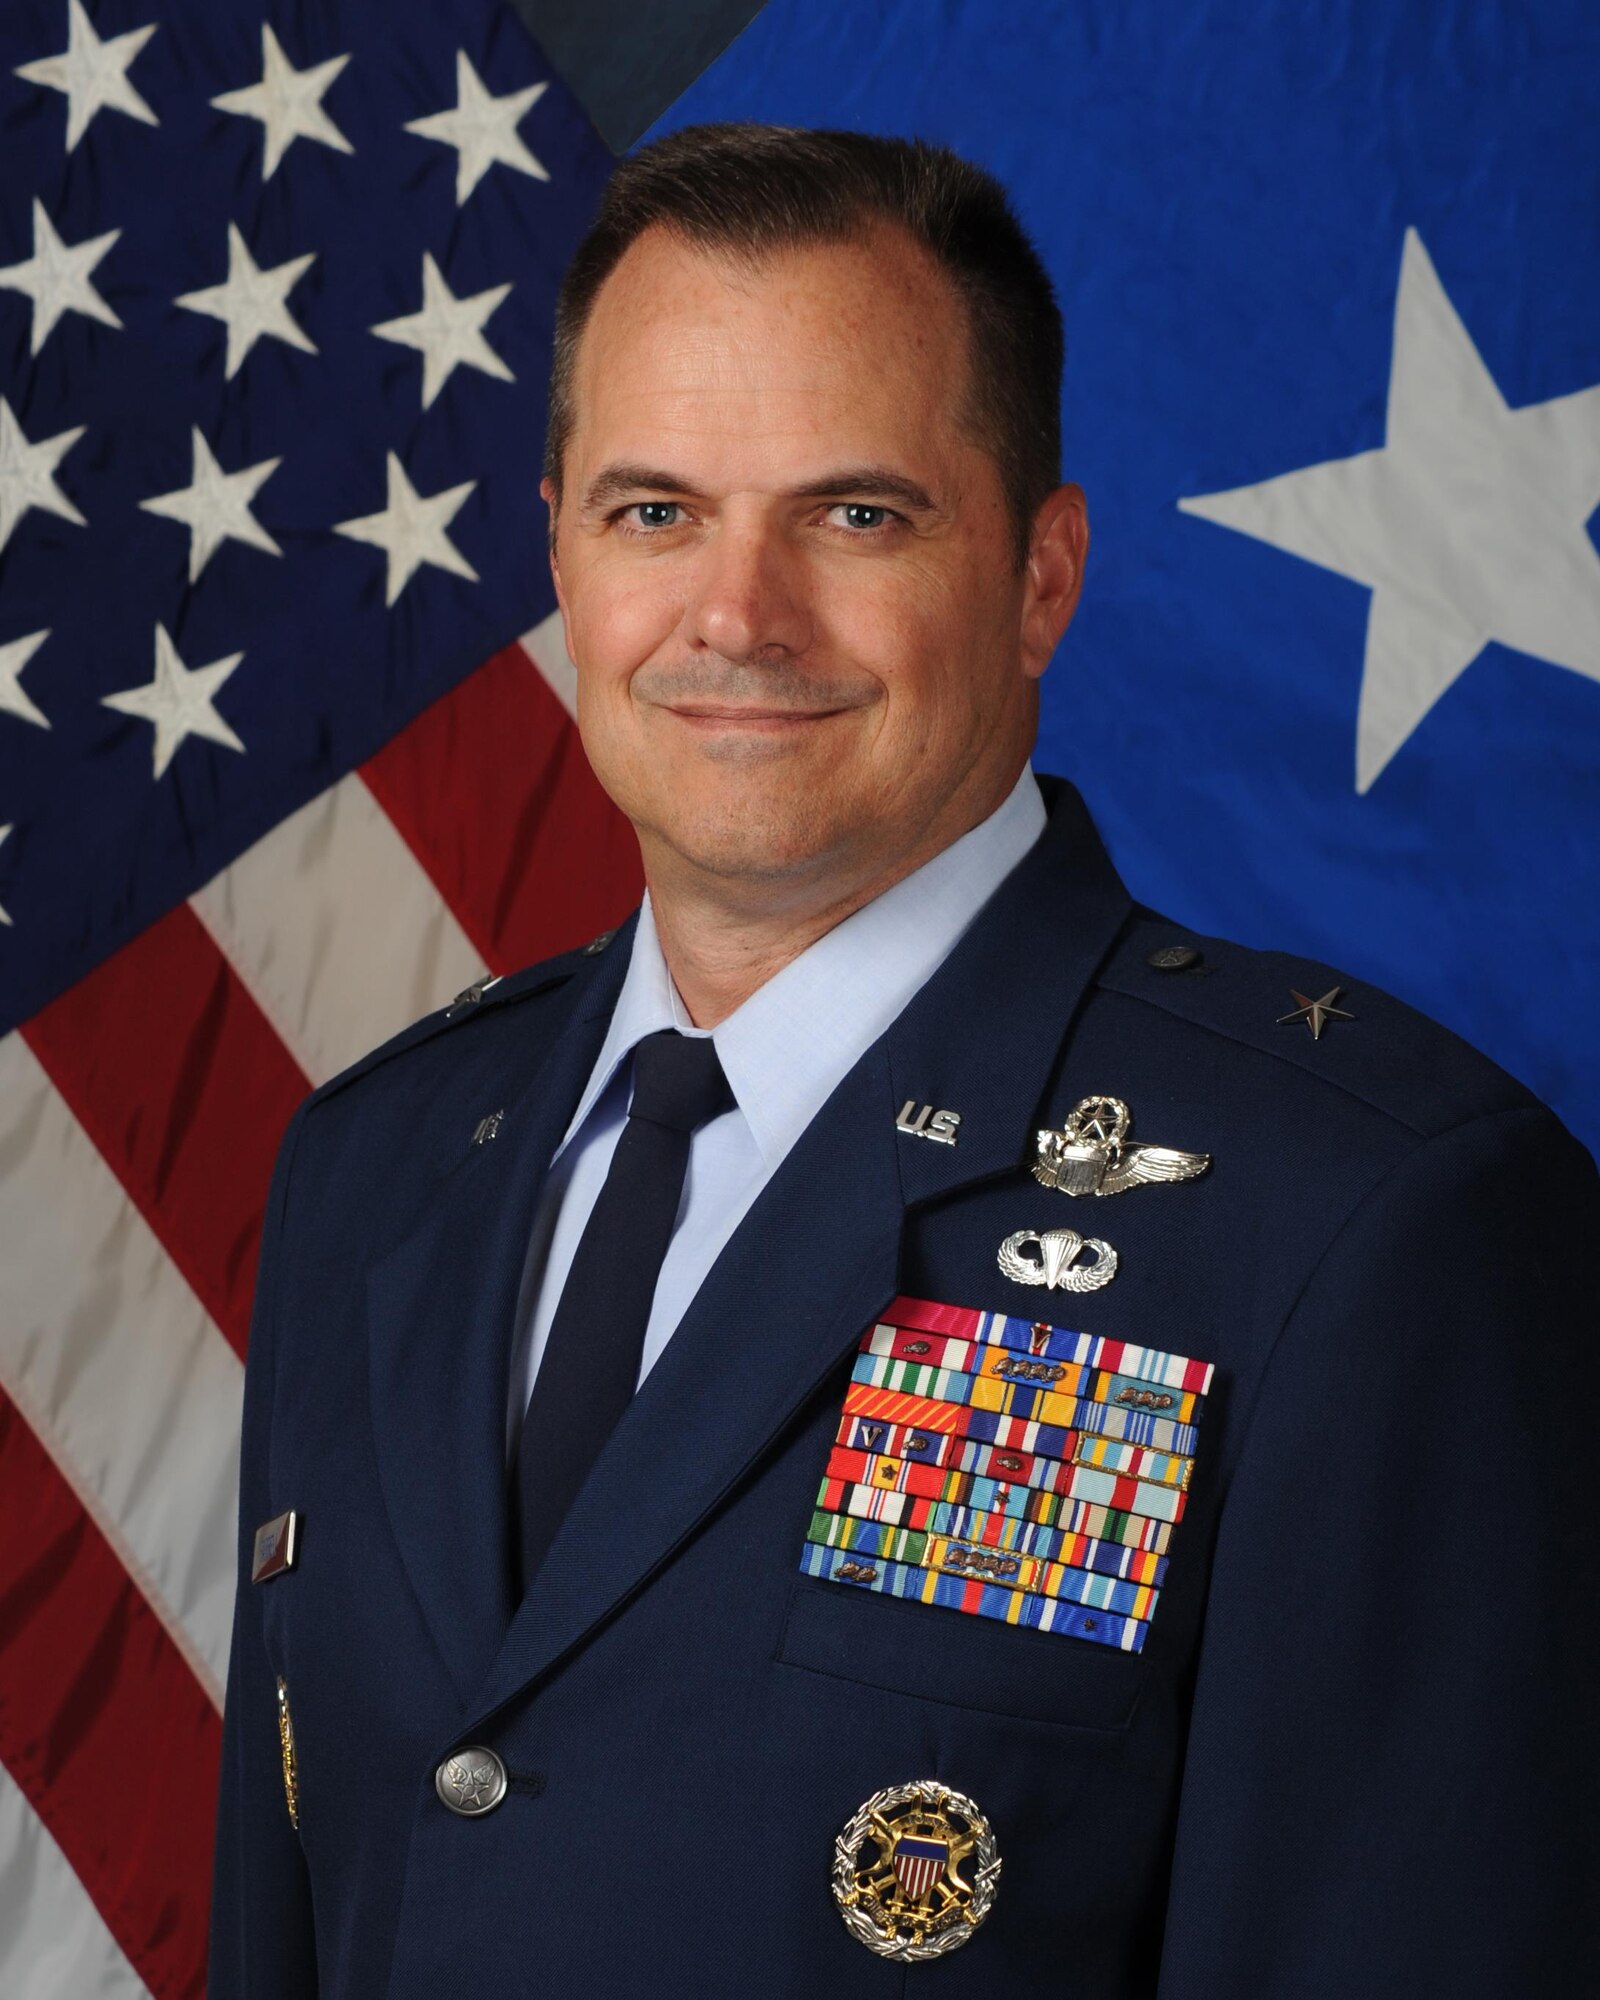 Brig. Gen. Sean Farrell will become the Director of the Air Force Life Cycle Management Center's Security Assistance and Cooperation Directorate headquartered at Wright-Patterson Air Force Base.